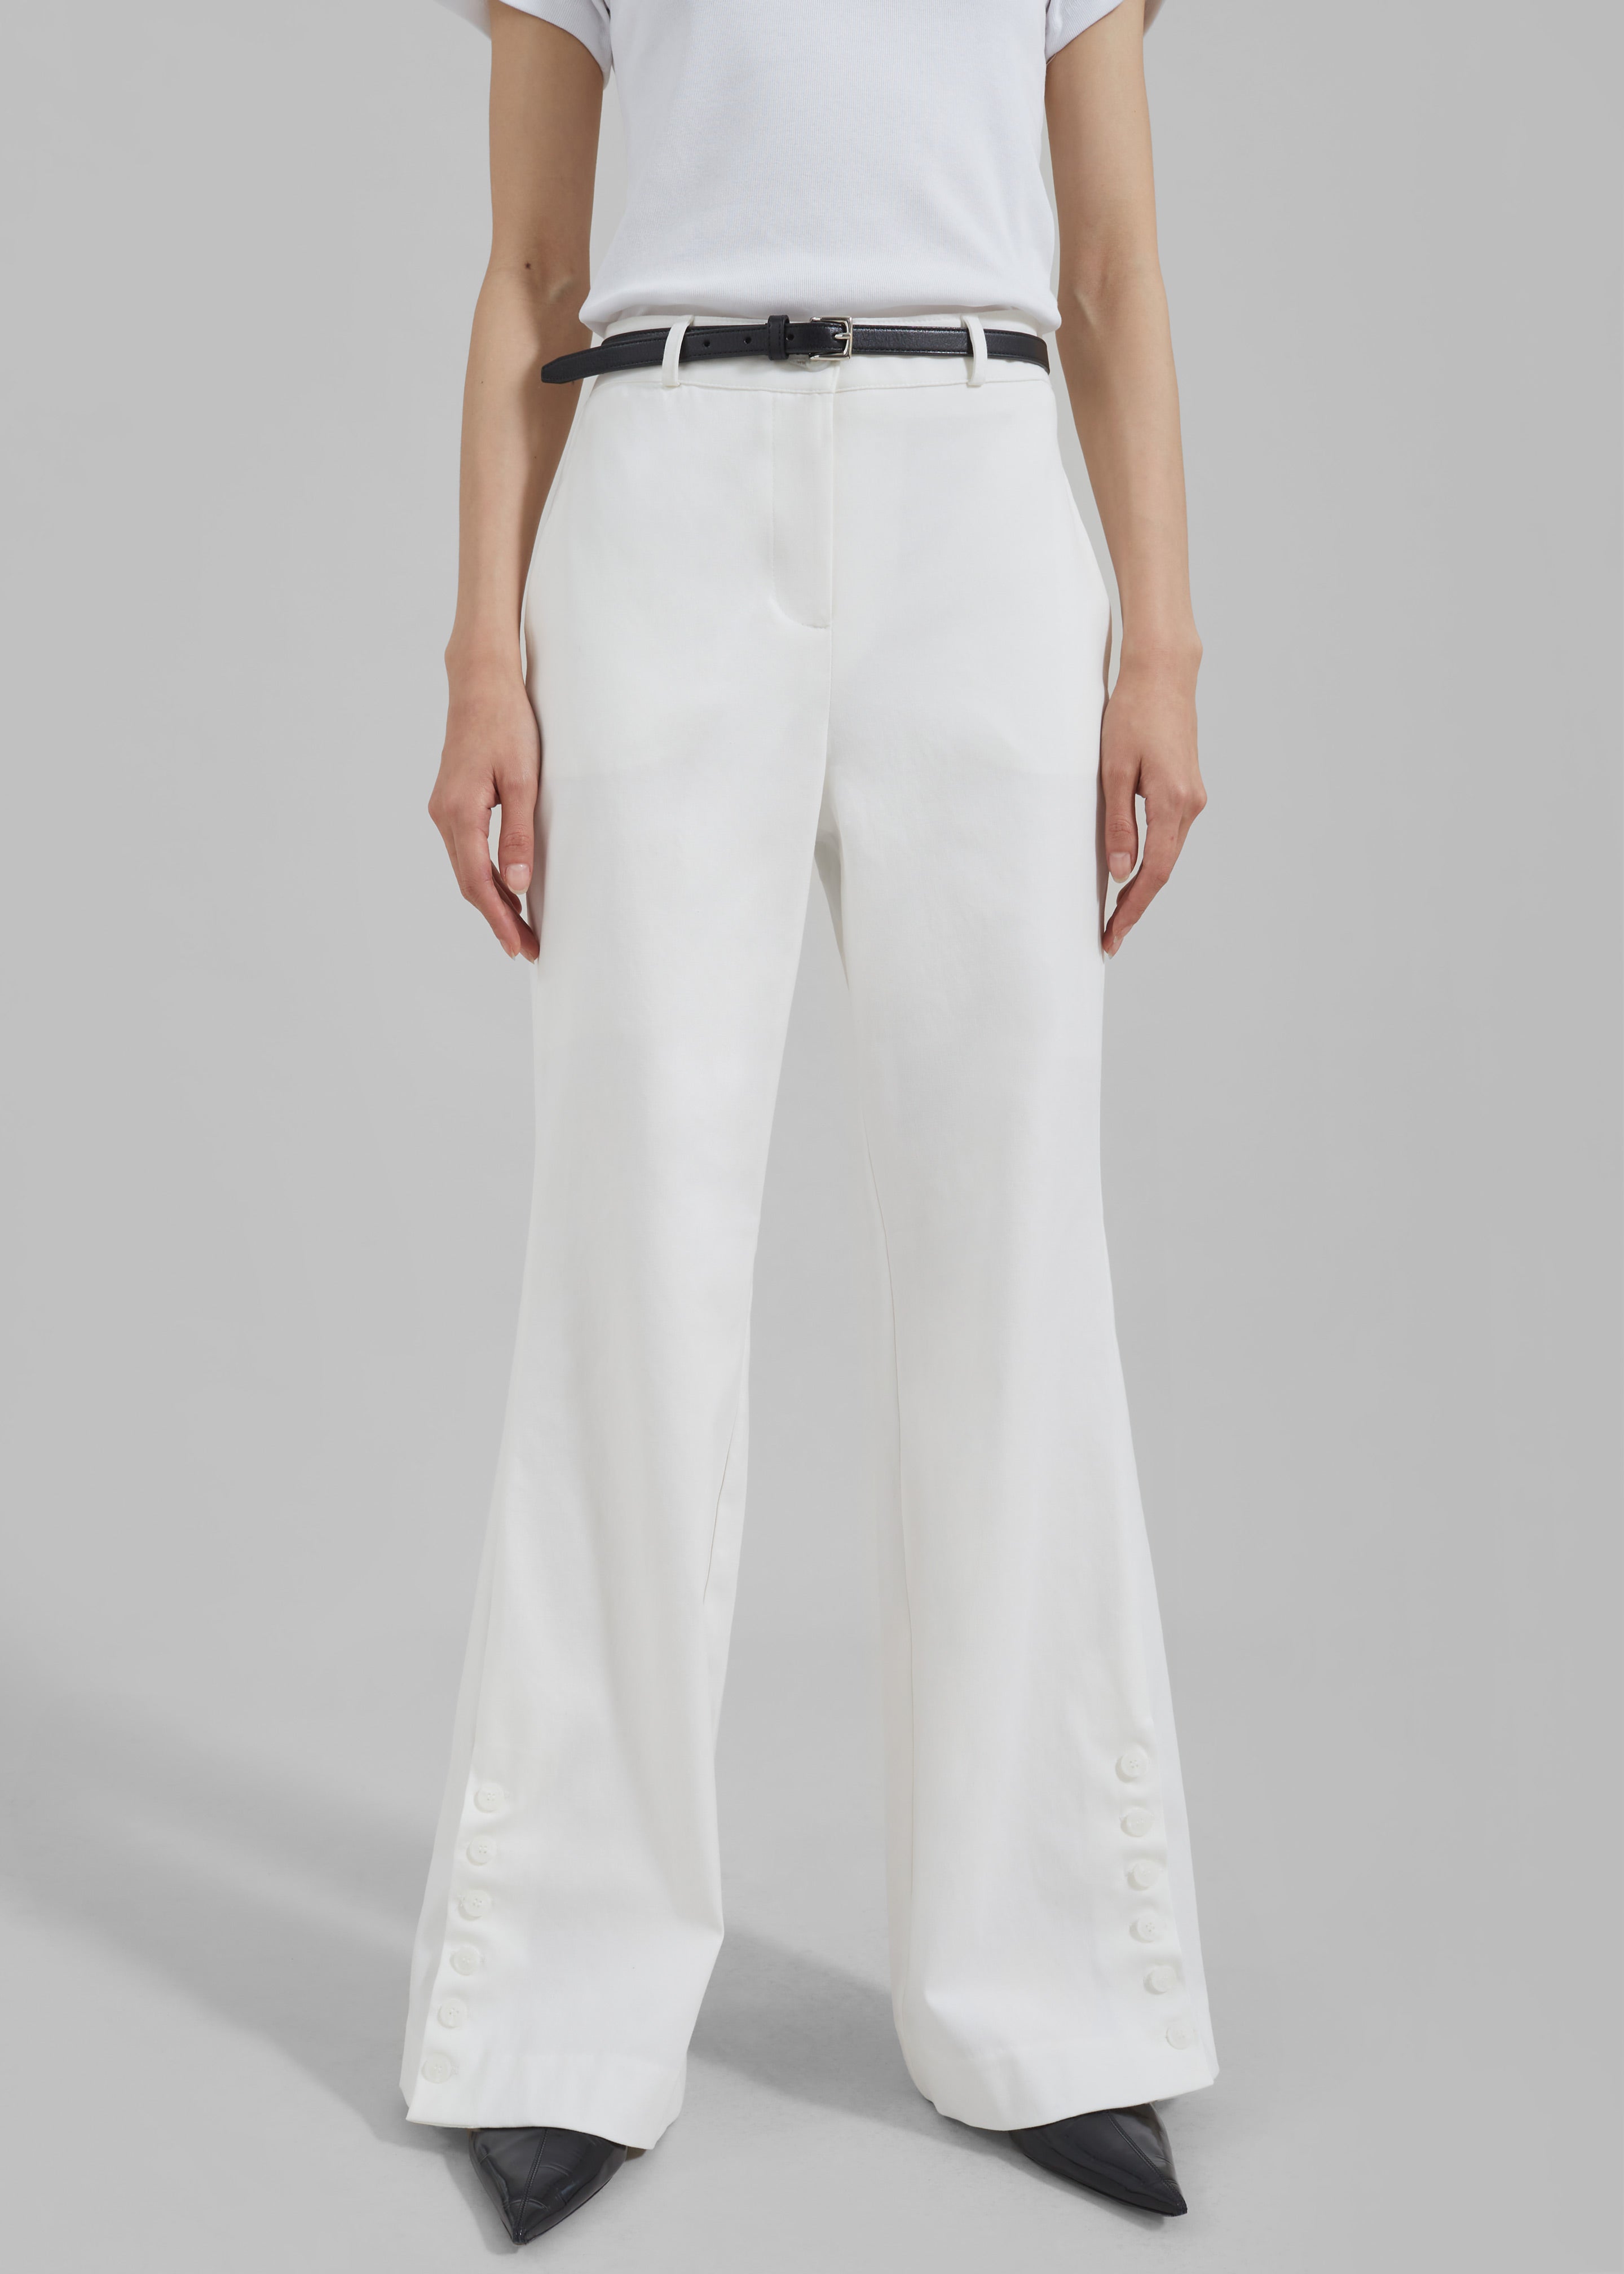 Michelle Flare Pants - Ivory - 4